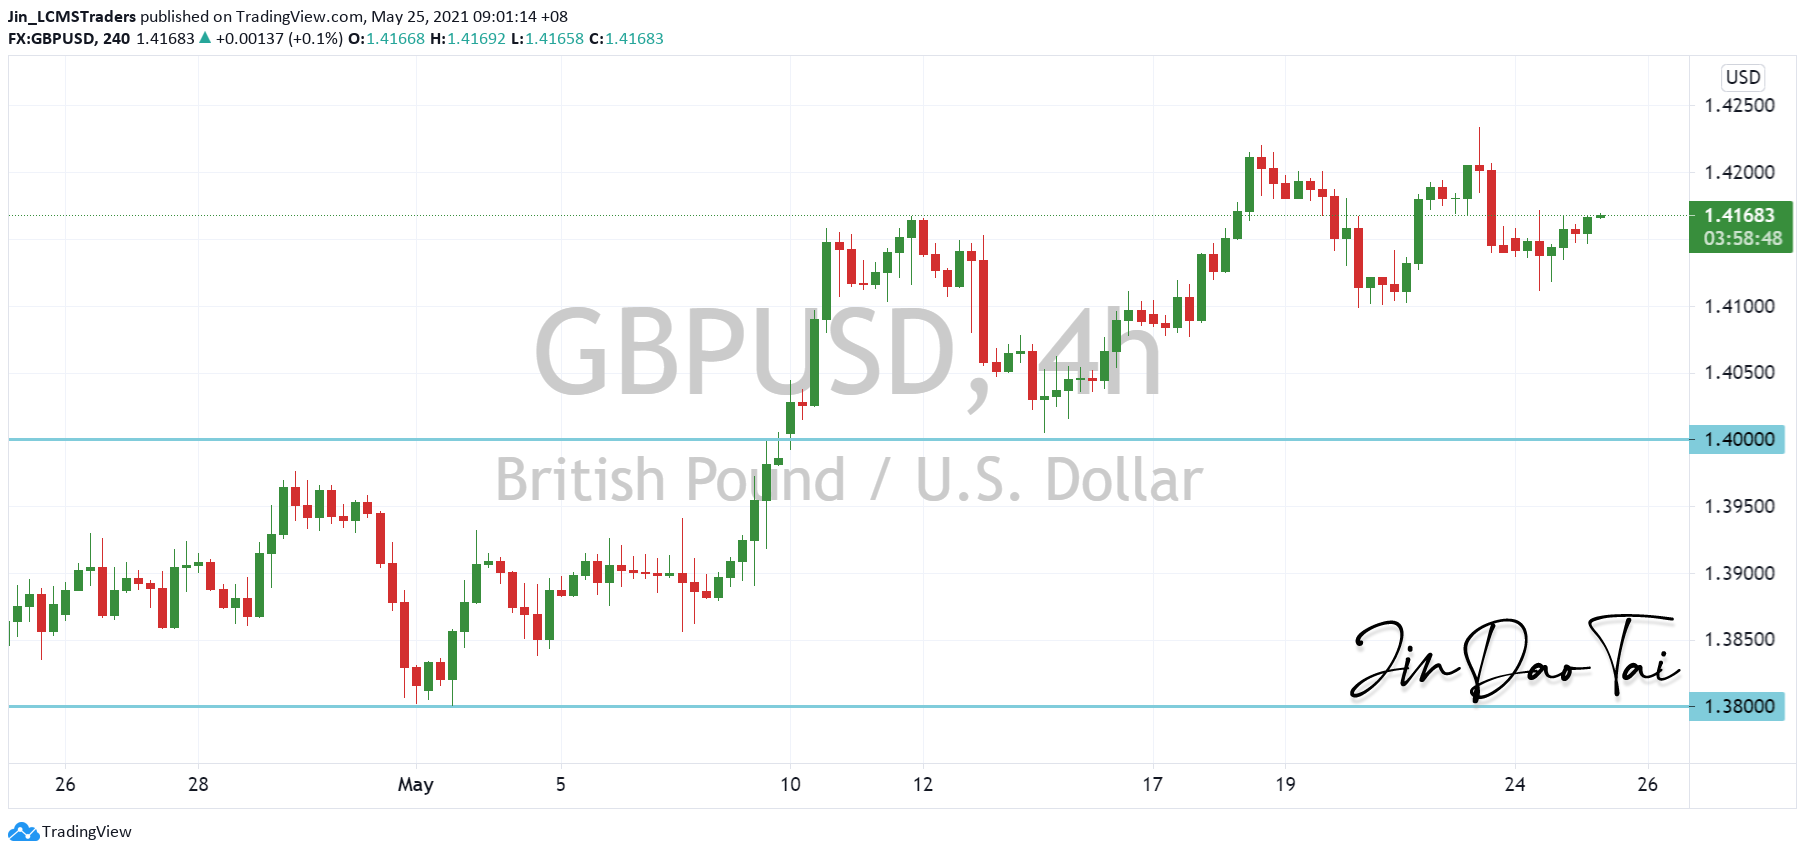 GBP/USD Outlook (25 May 2021)